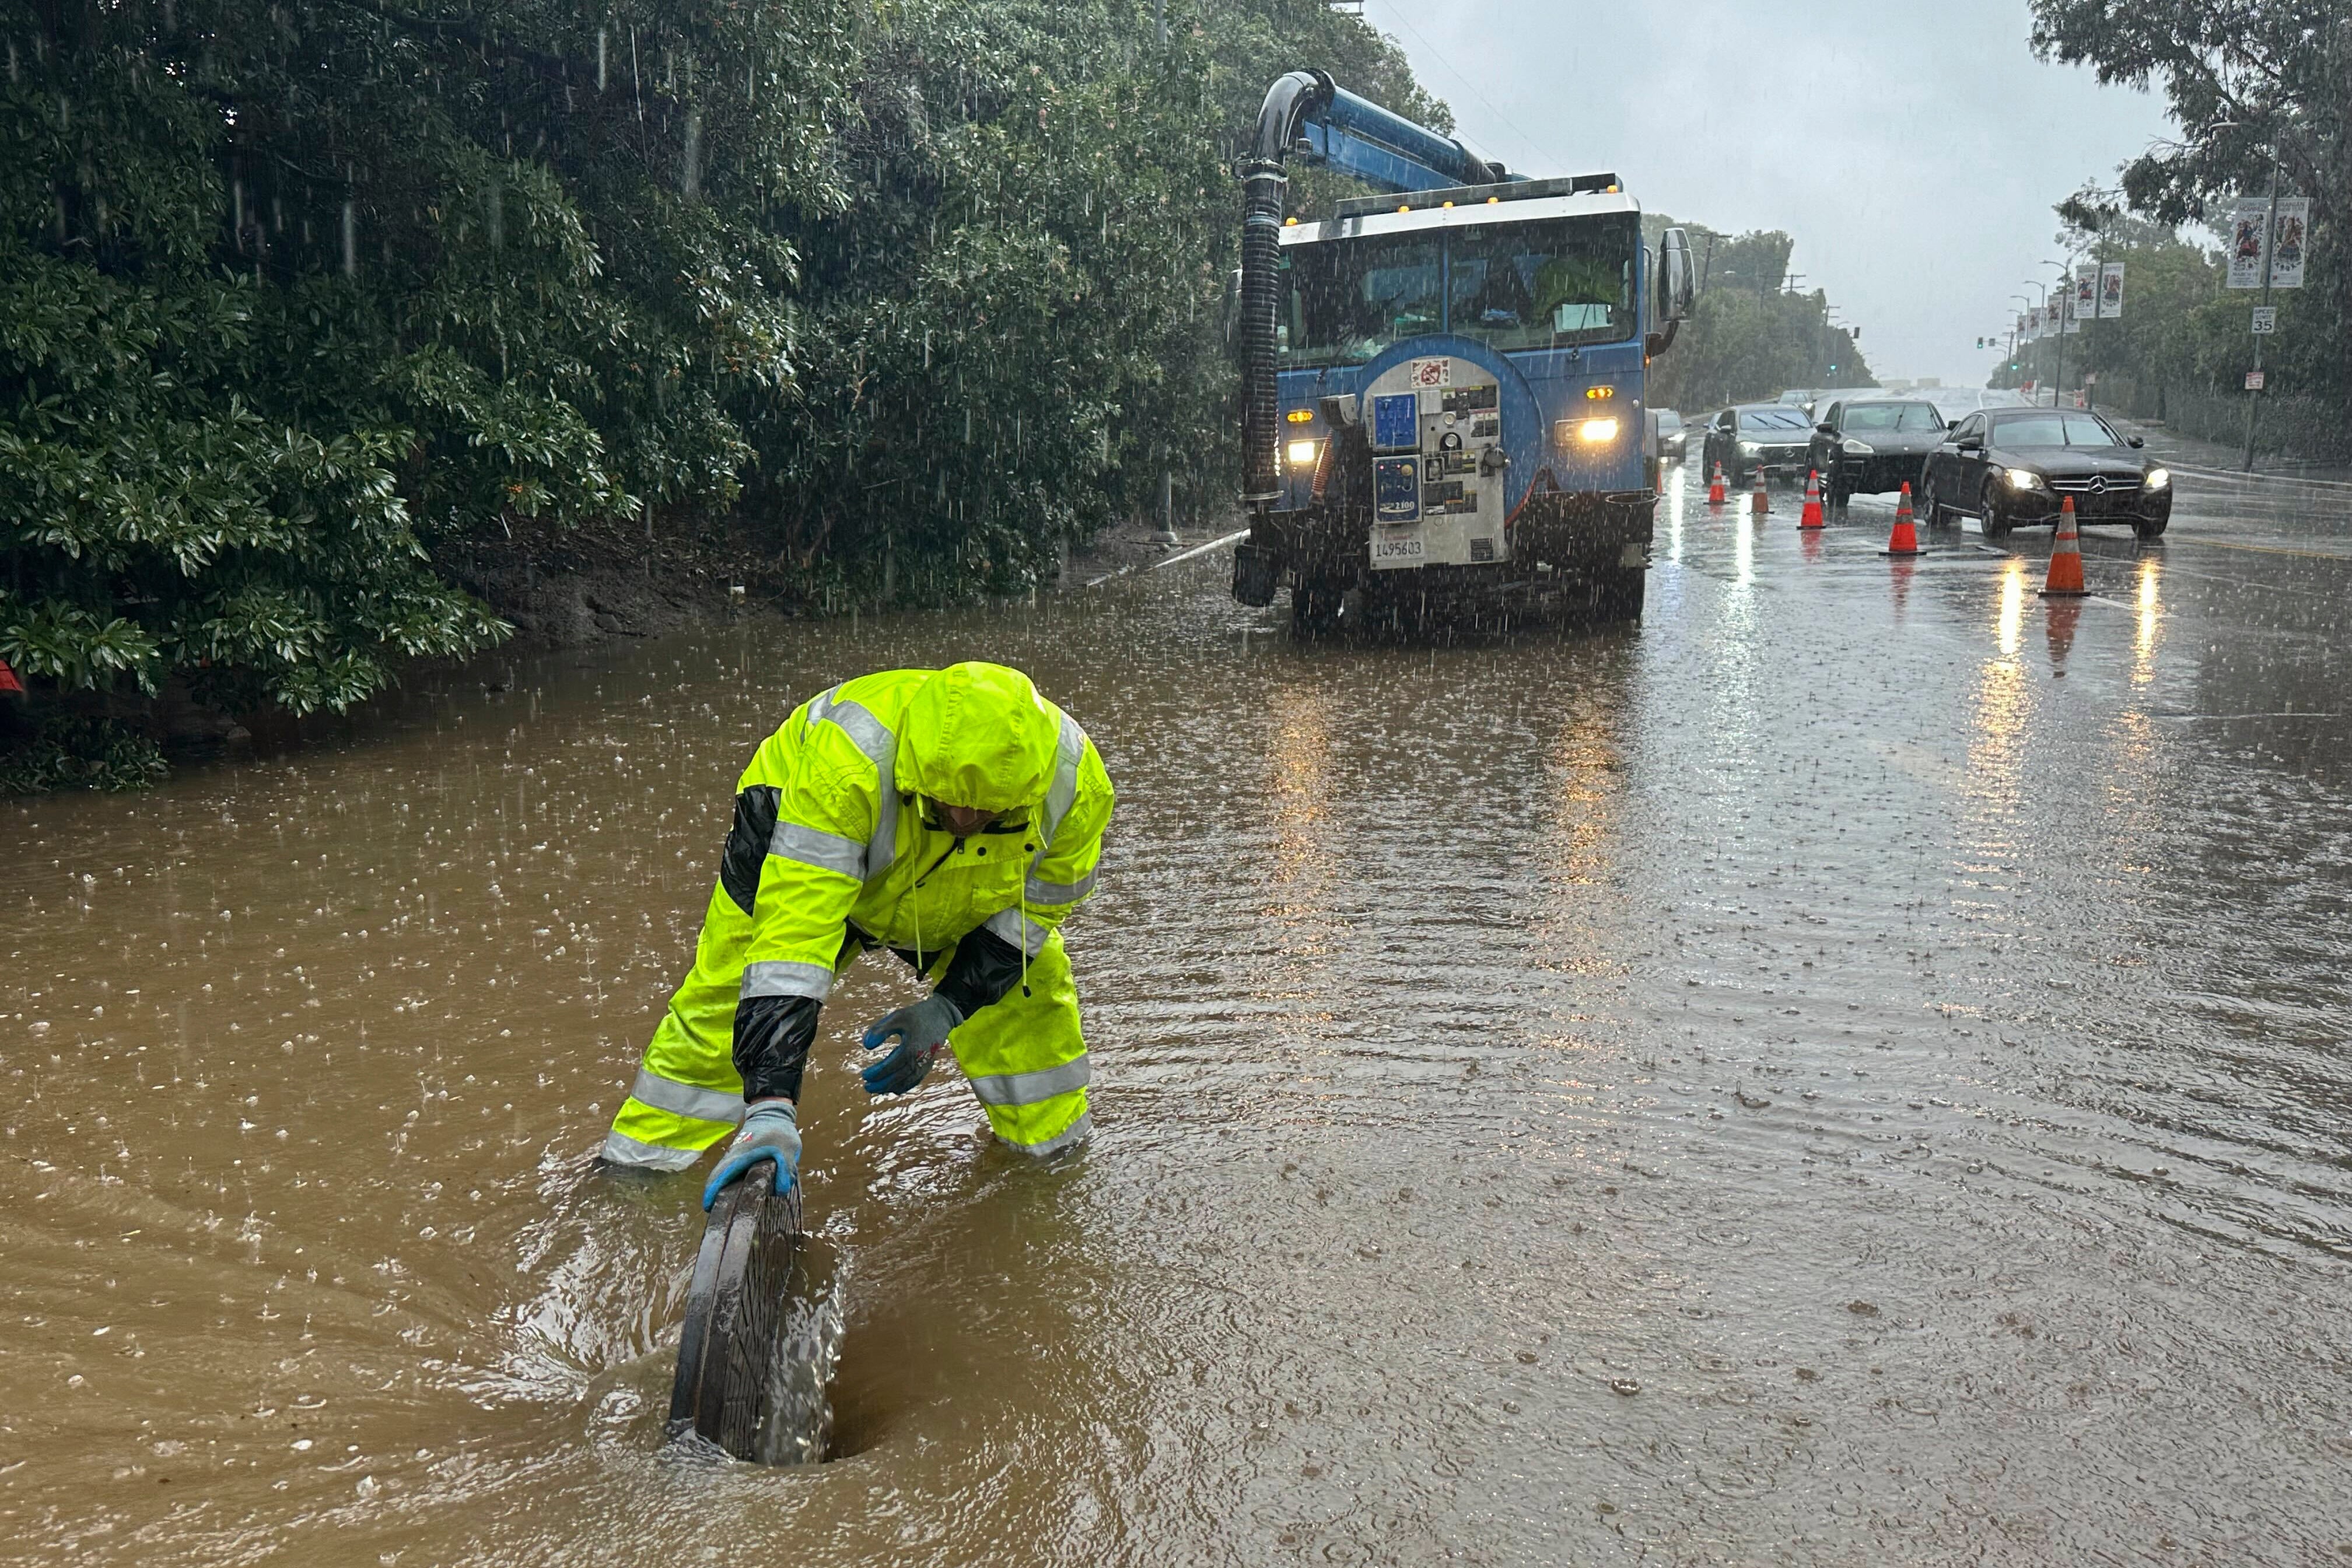 An emergency responder works in California floodwaters